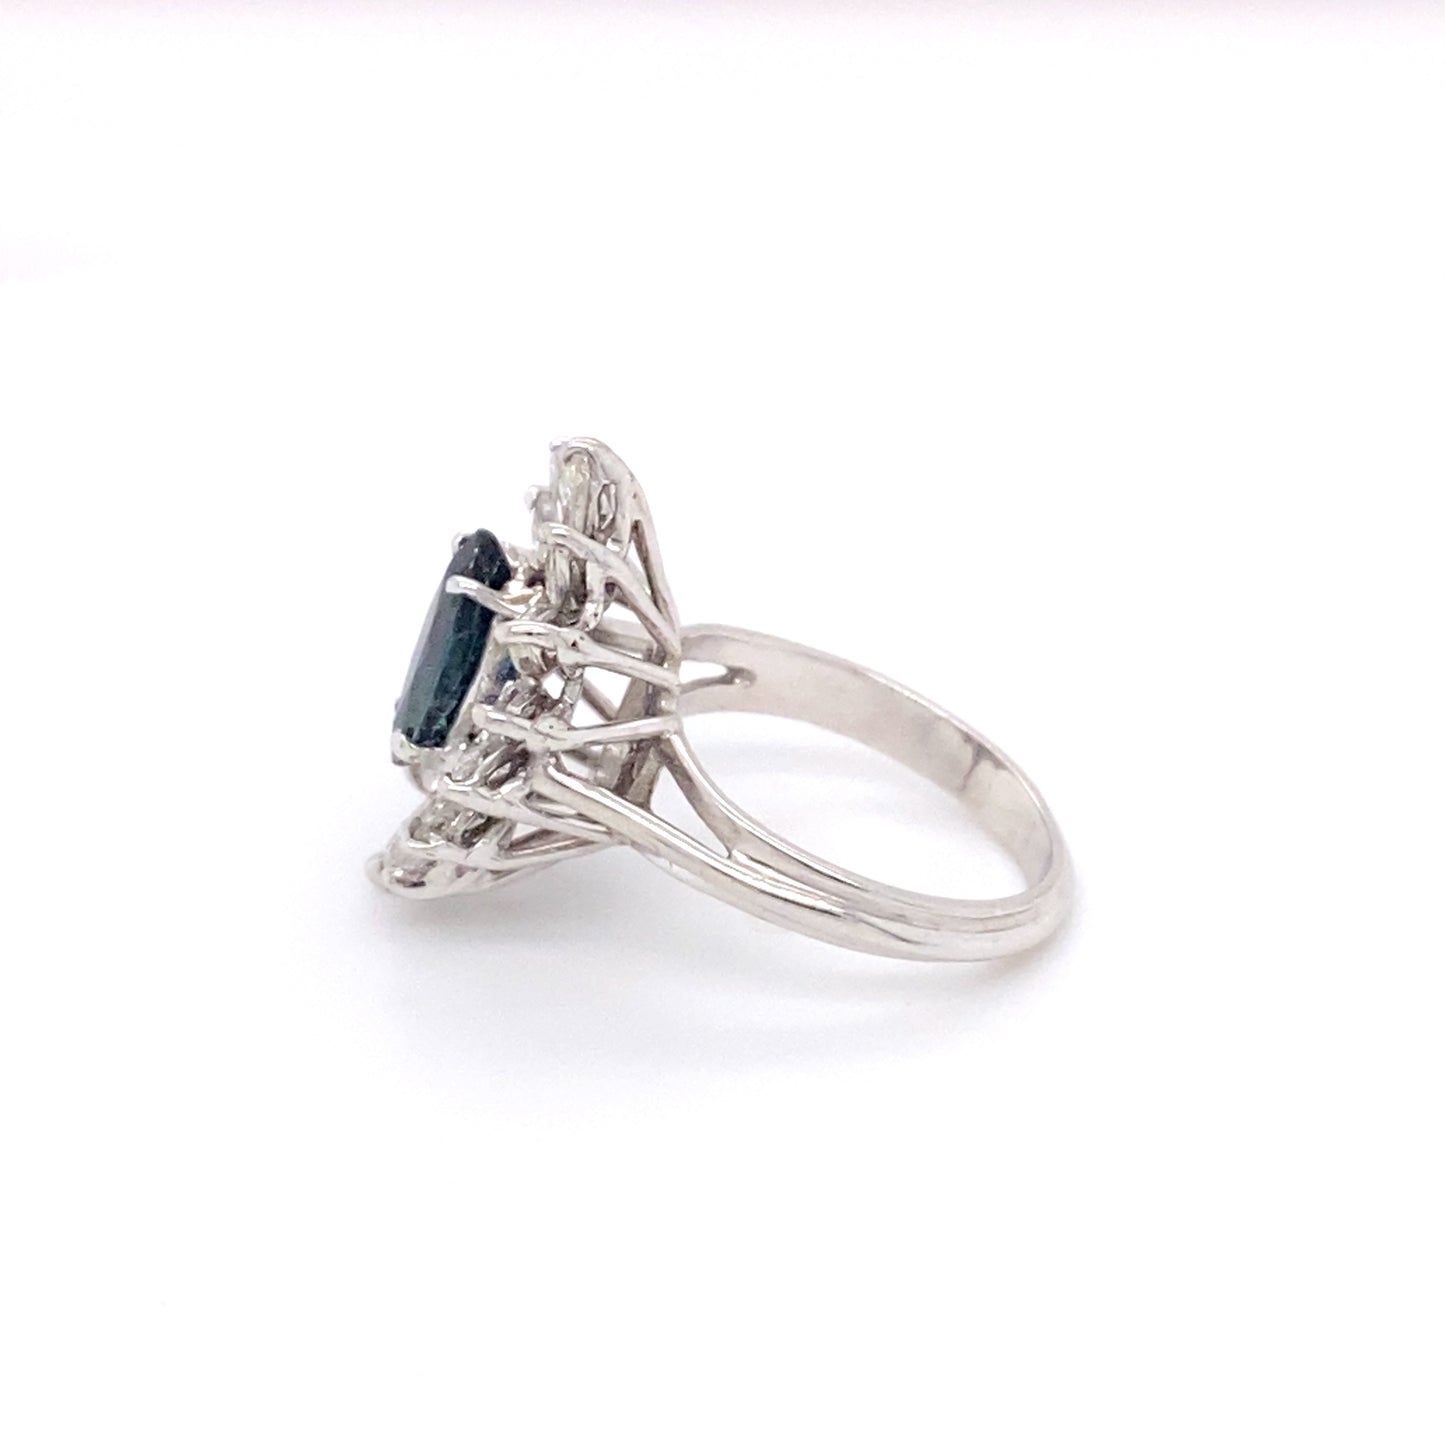 1950s Vintage Marquise Sapphire and Diamond Ring in 18K White Gold